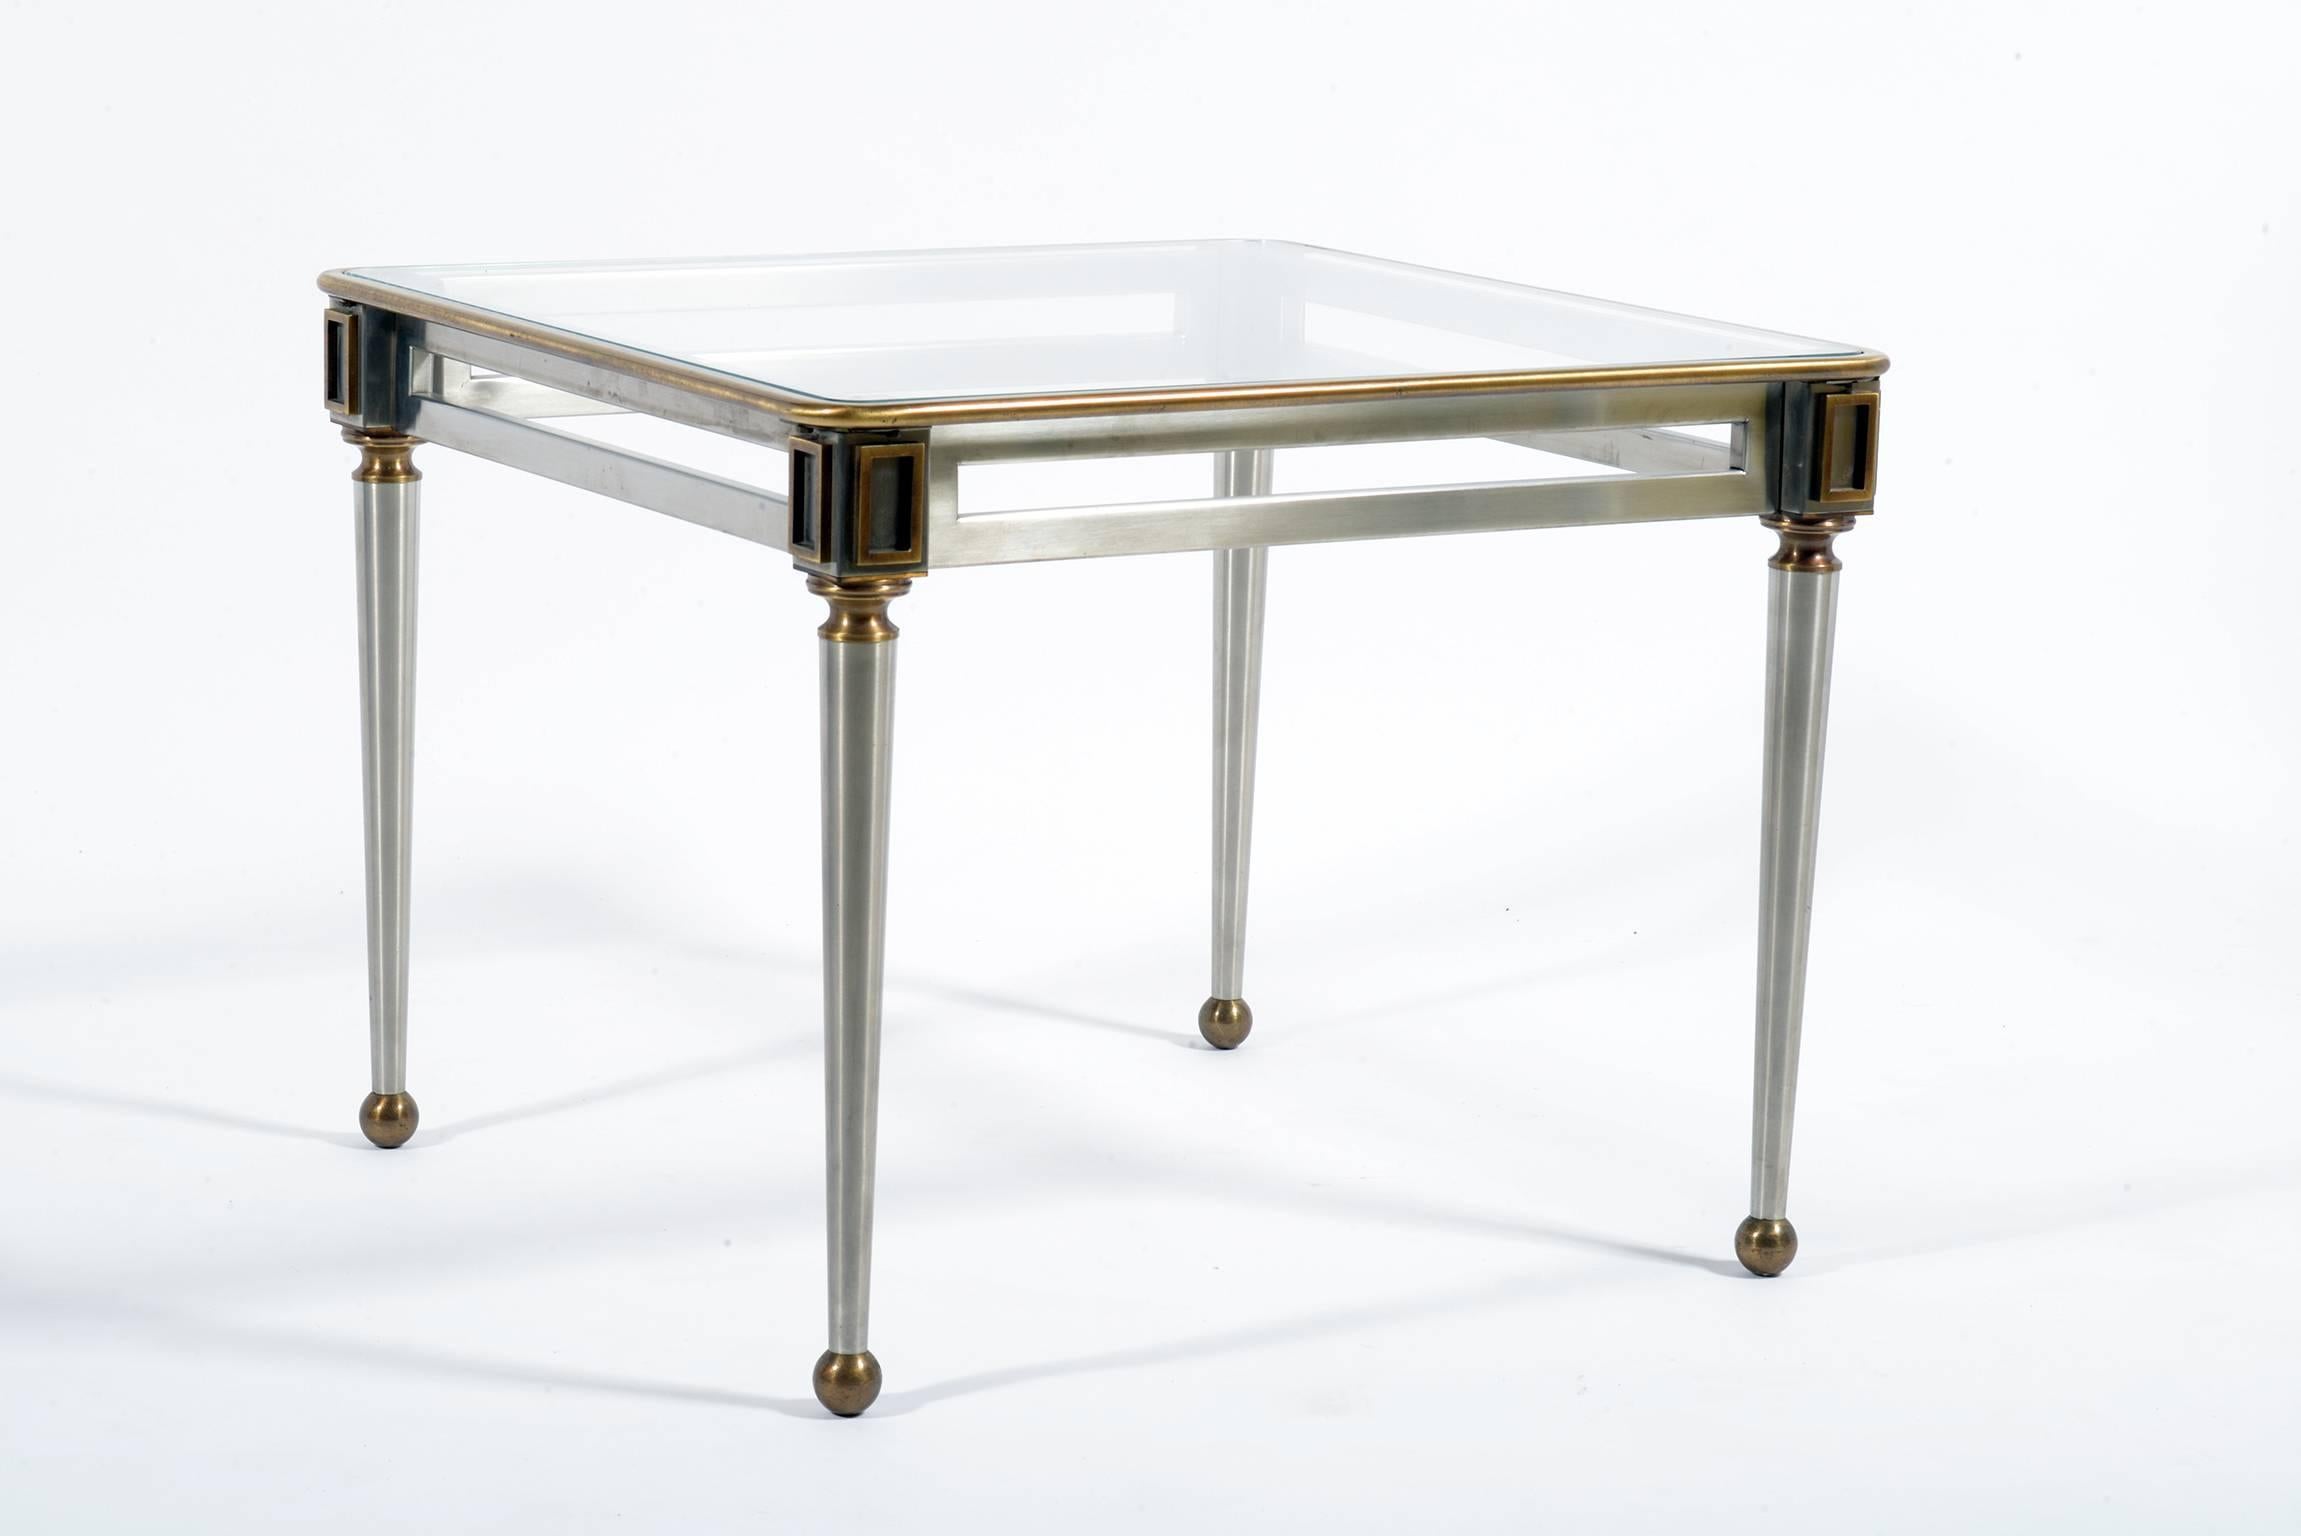 Pair of midcentury steel and brass details elegant squared side tables or nightstands, thick beveled glass top rounded corner.
Banci Florence, Italy, 1960s.
The price is for two.
 